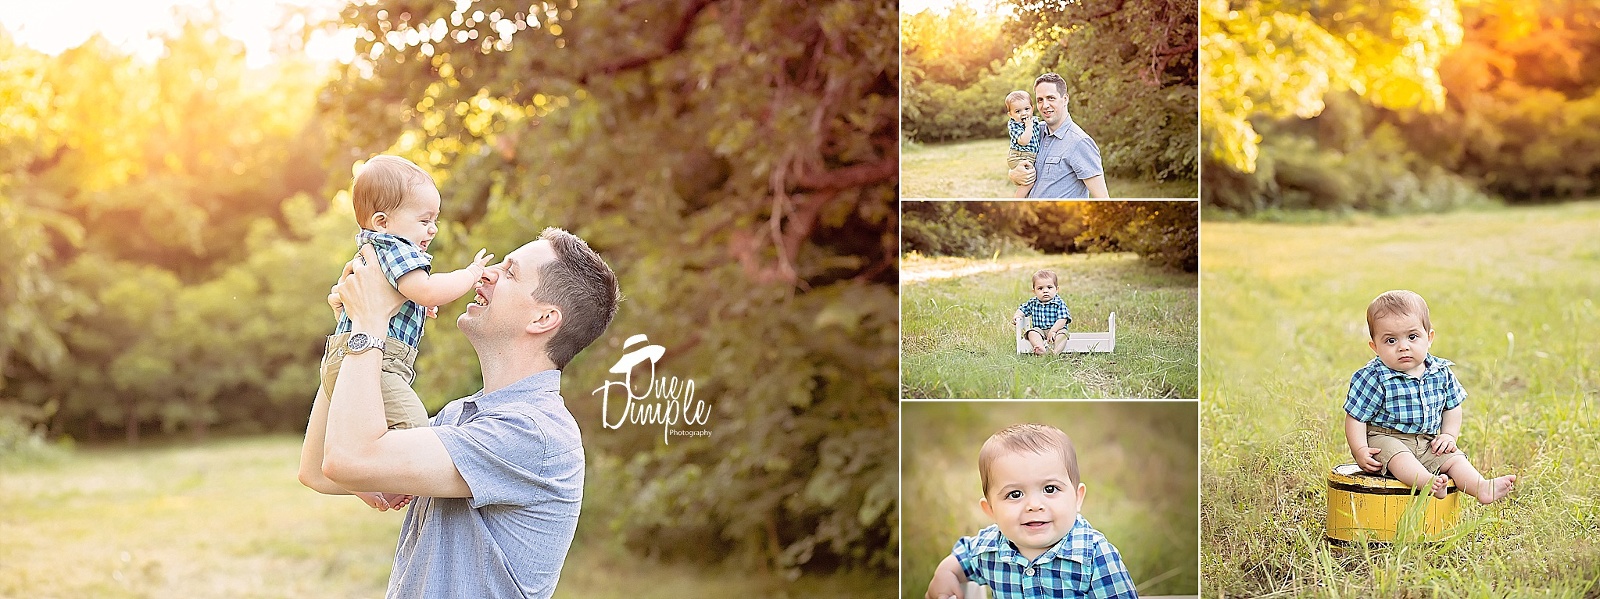 Outdoor Family Session DFW